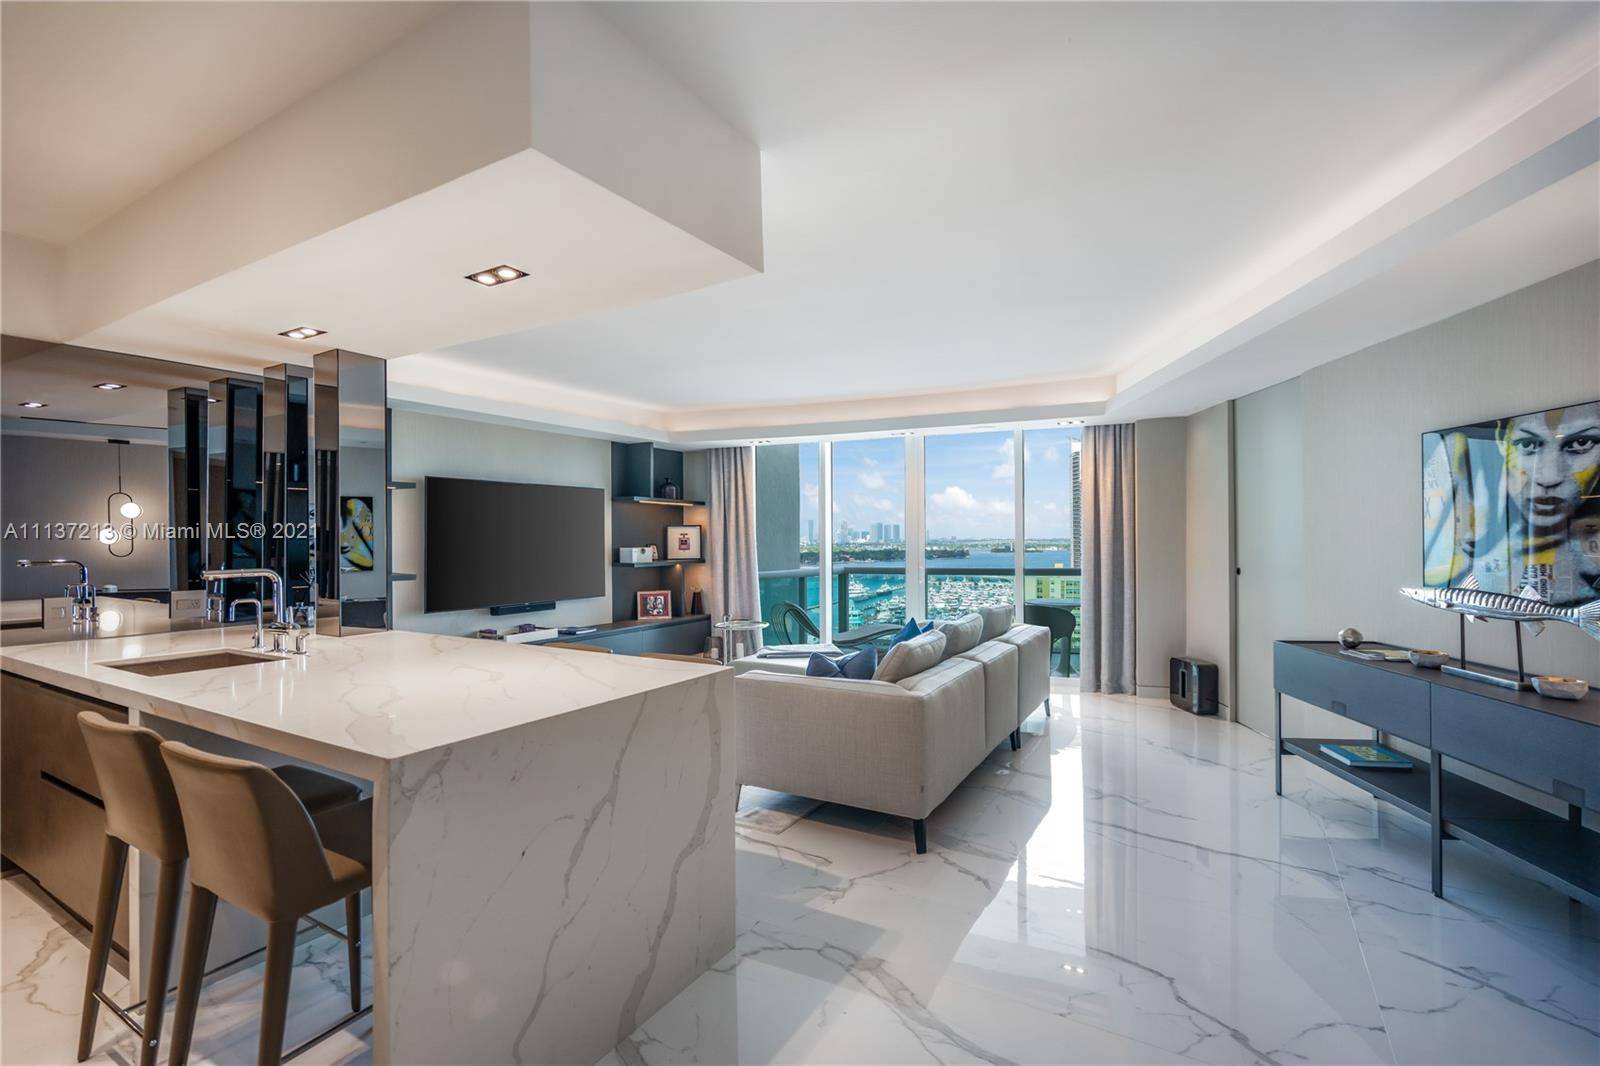 This stunning newly renovated penthouse in the prestigious South of fifth neighborhood offers the ultimate Miami Beach lifestyle.